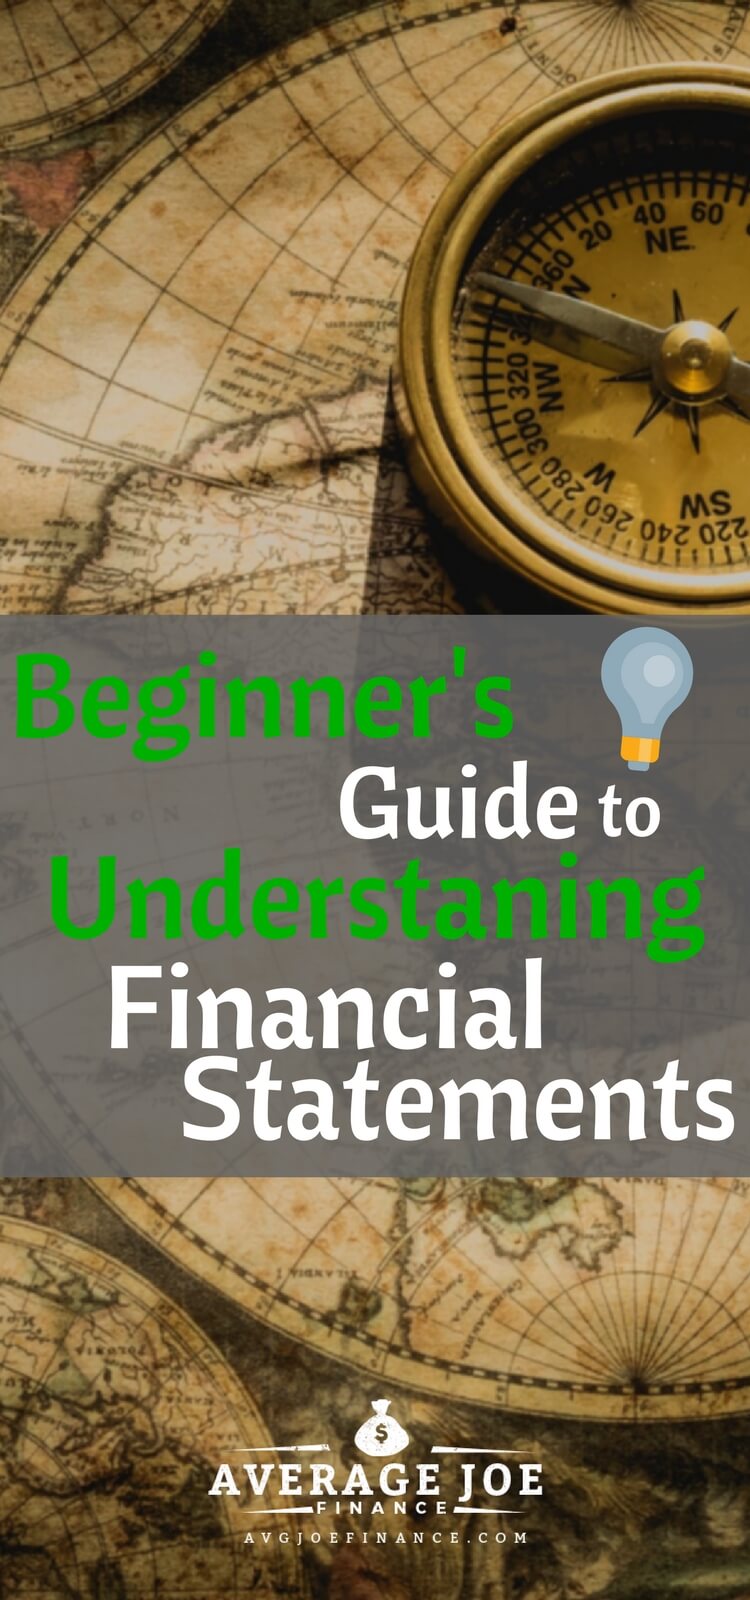 Everything you need to know about financial statements